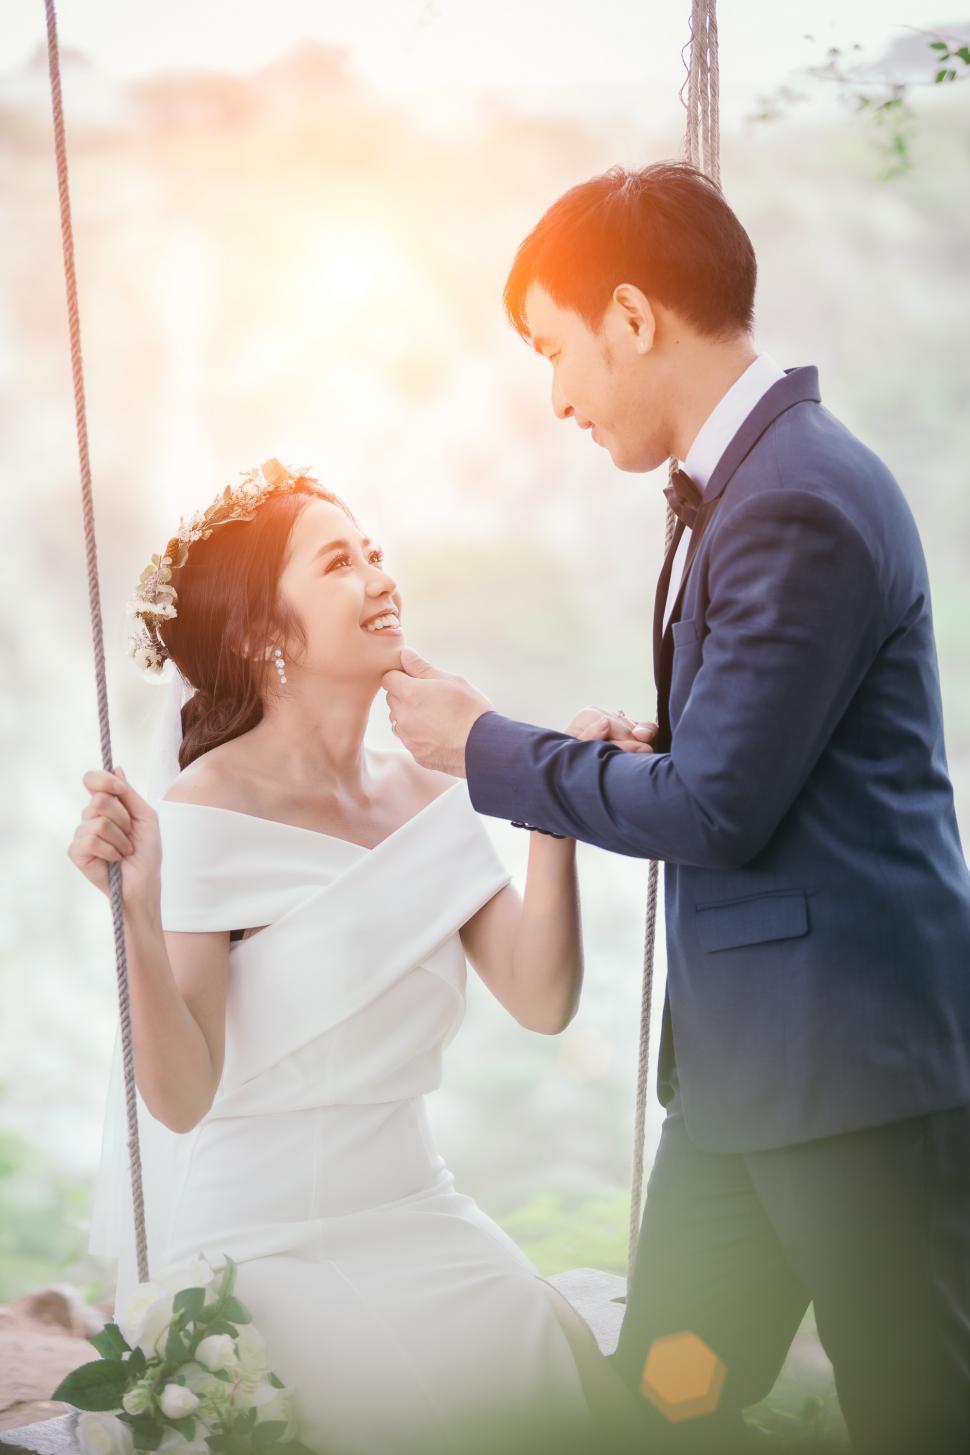 Free Image of Beautiful wedding couple in outdoor setting 